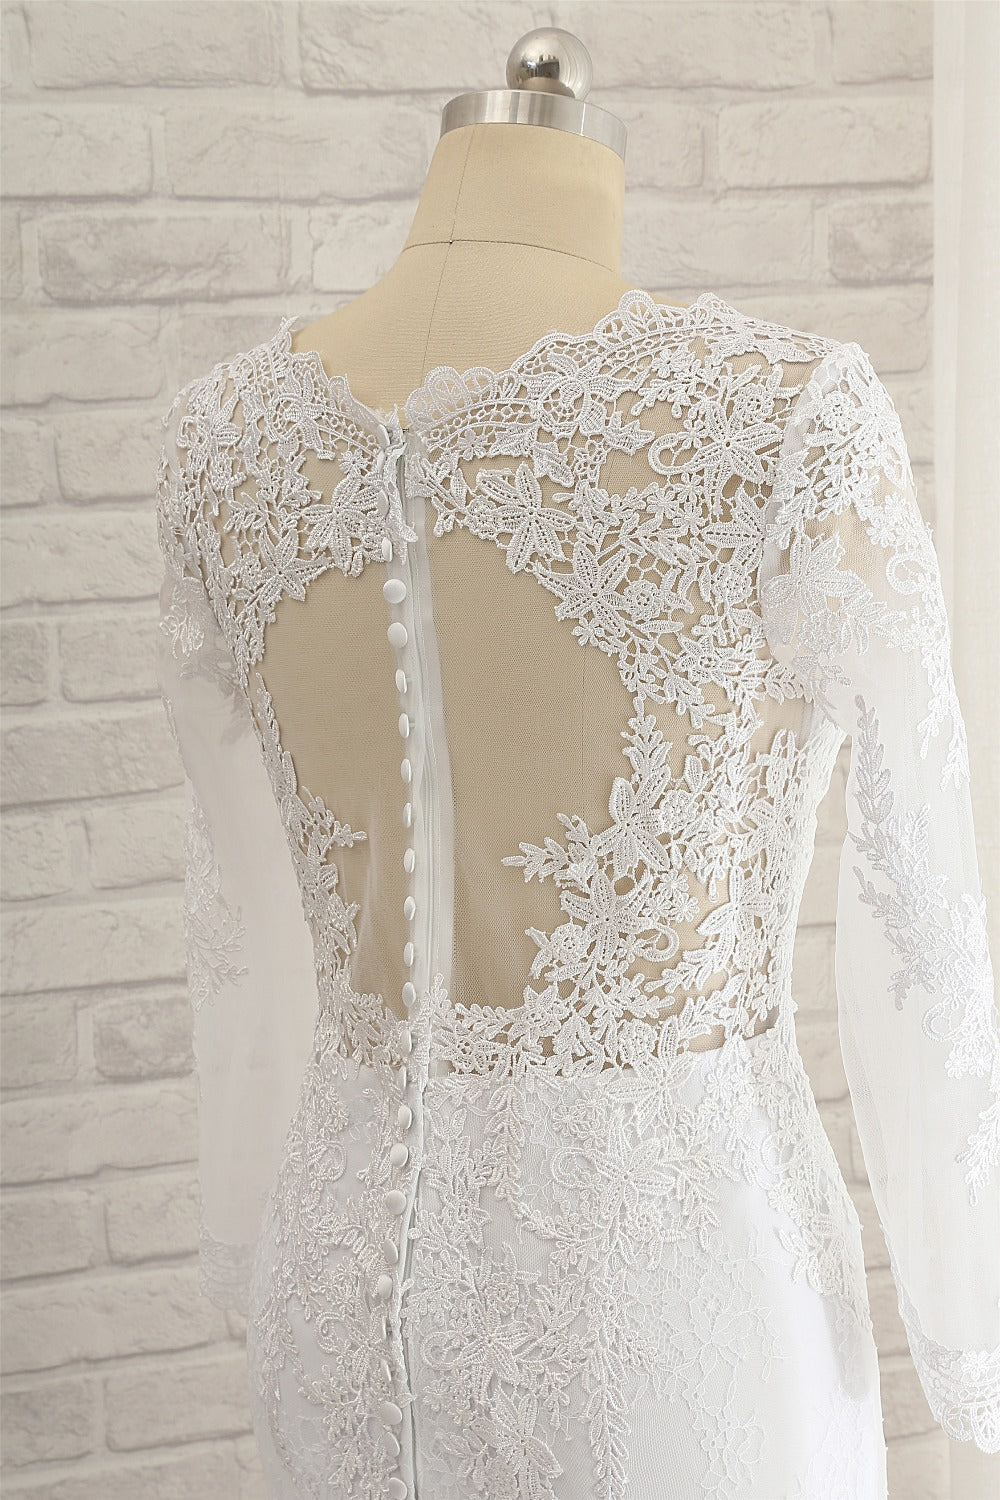 Stunning Jewel Long Sleeves Tulle Lace Wedding Dress Mermaid Jewel Appliques Bridal Gowns On Sale